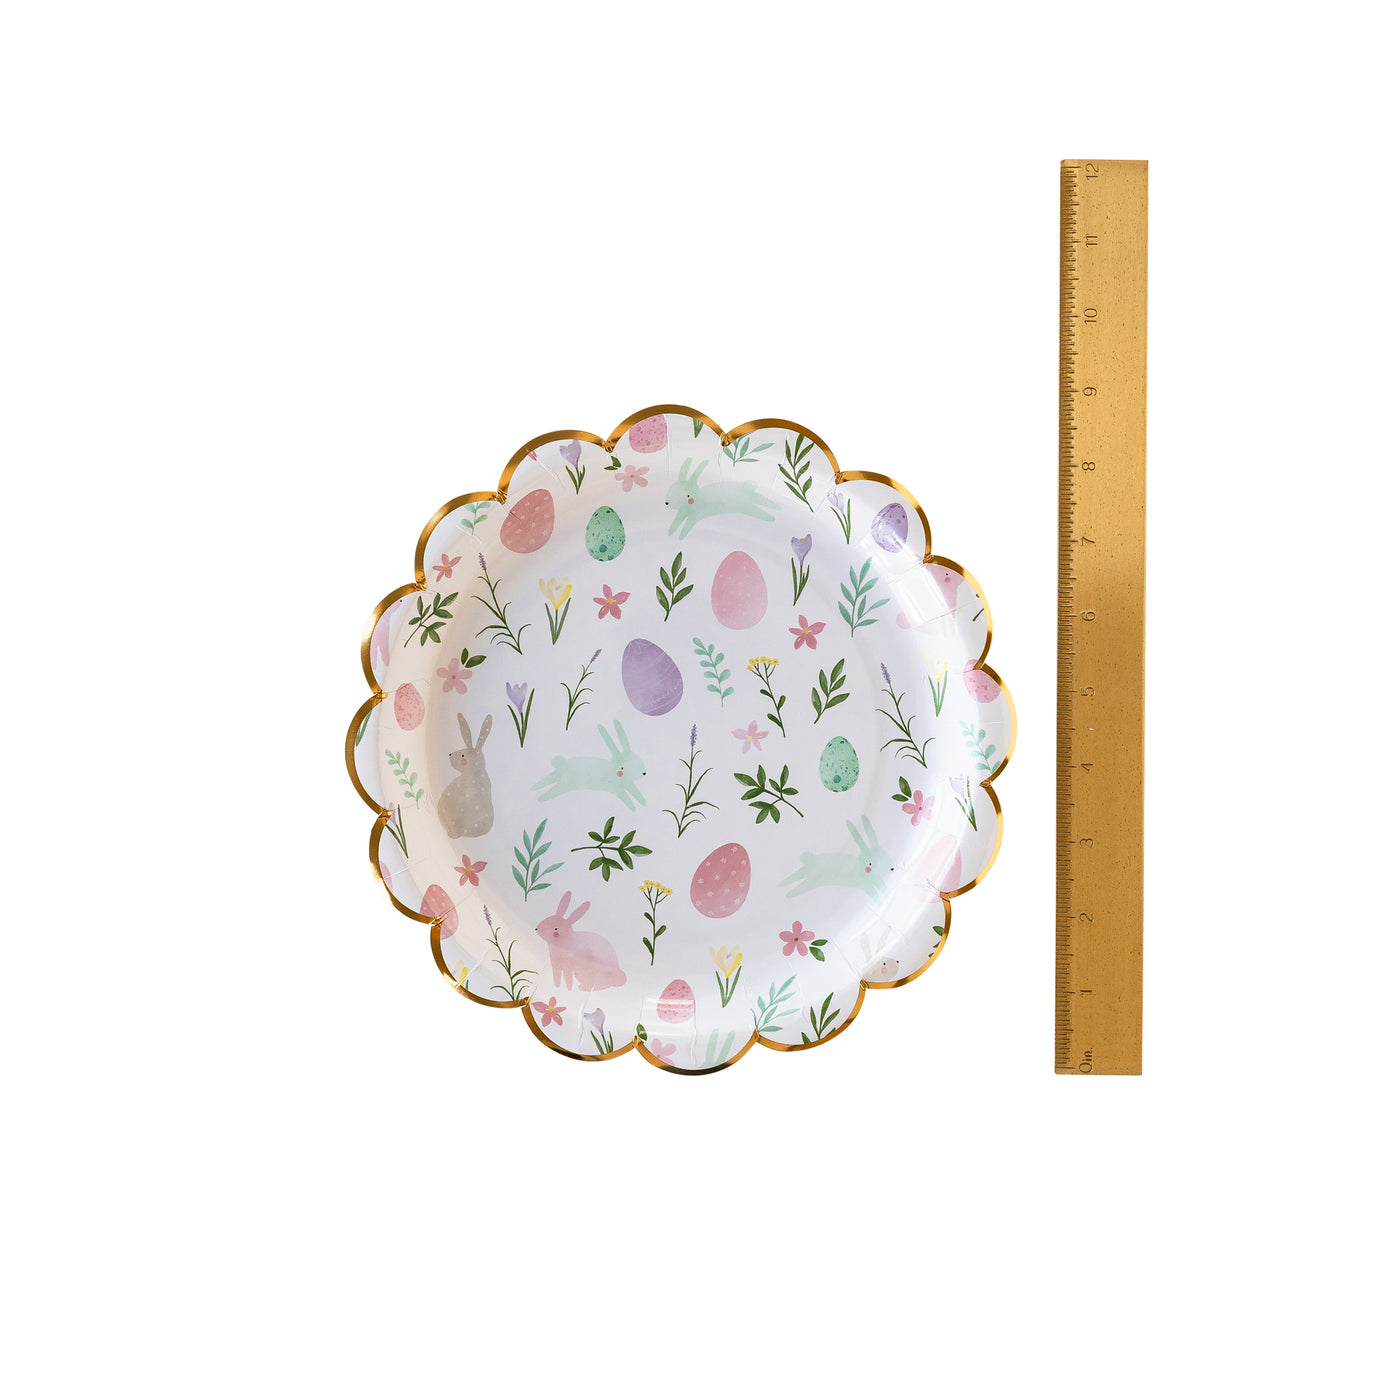 EAS941 - Watercolor Scatter Round 9" Plate